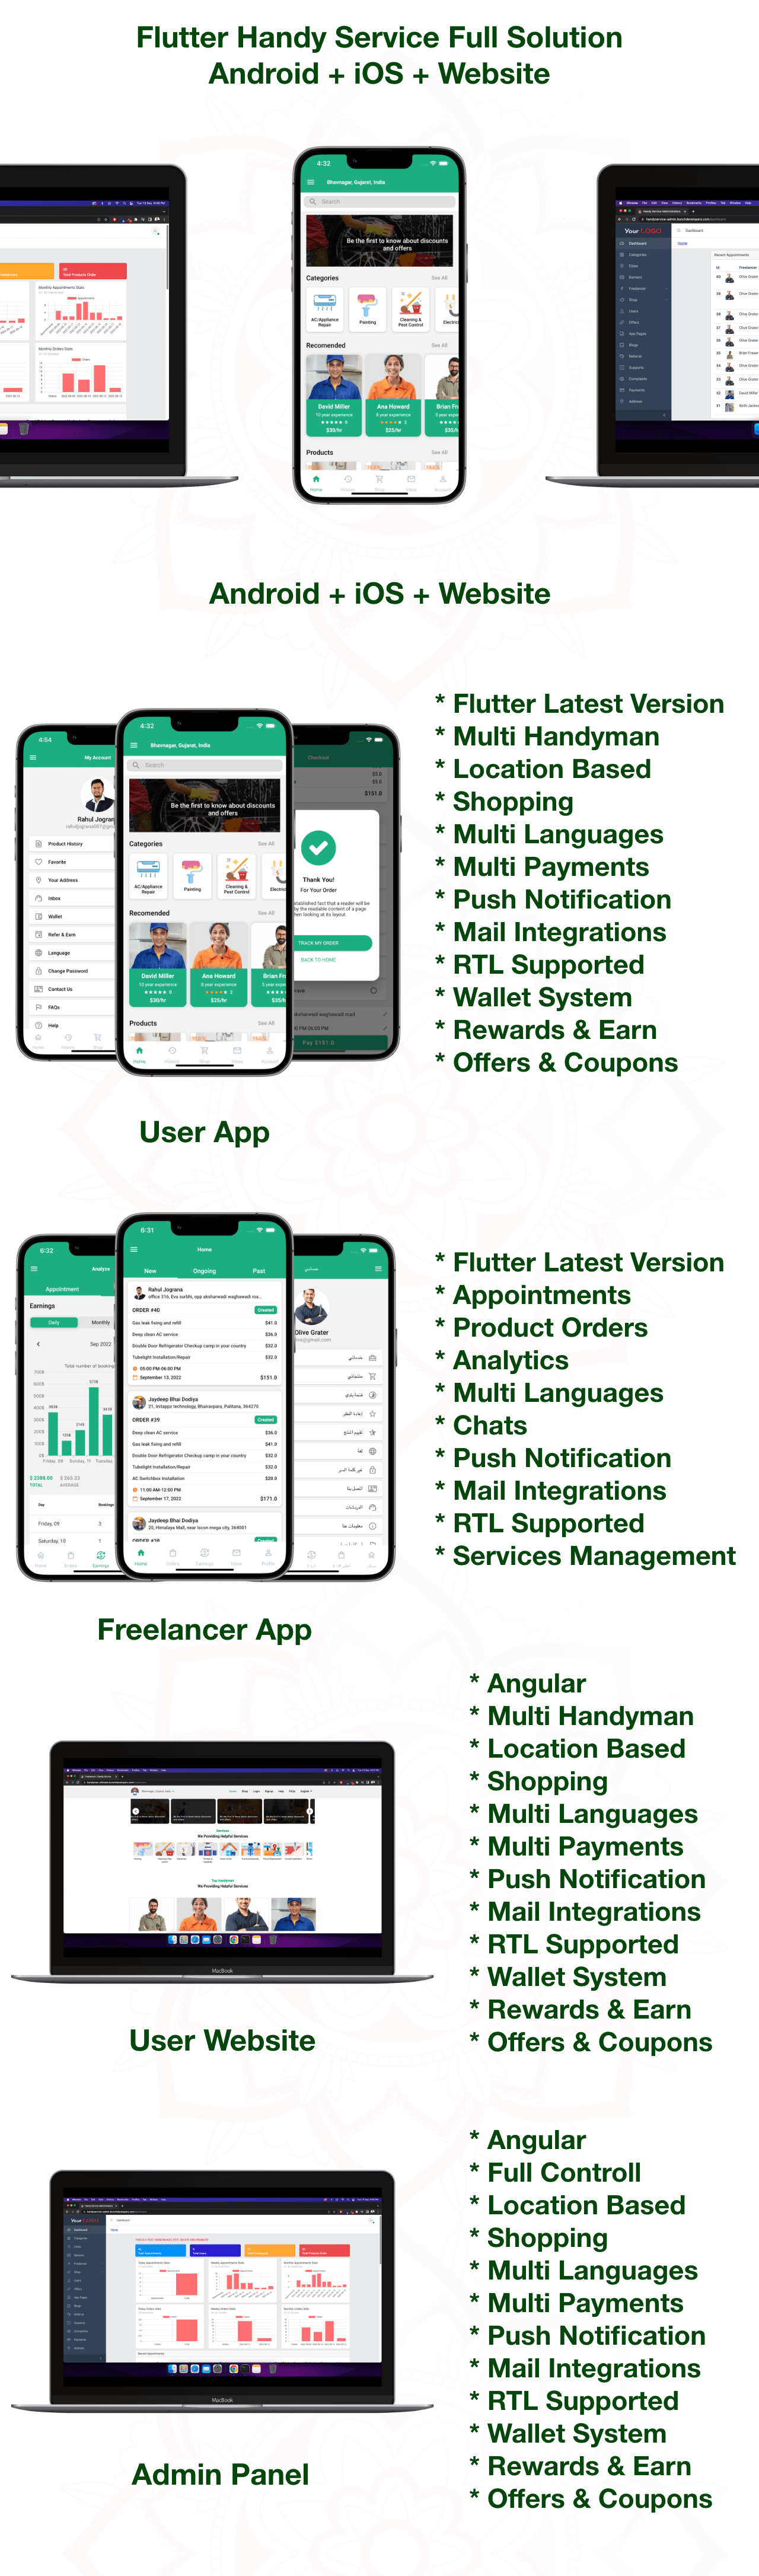 Flutter Handy service - On-Demand Home Services & Shopping Android+iOS+Website Full Solution Laravel - 2